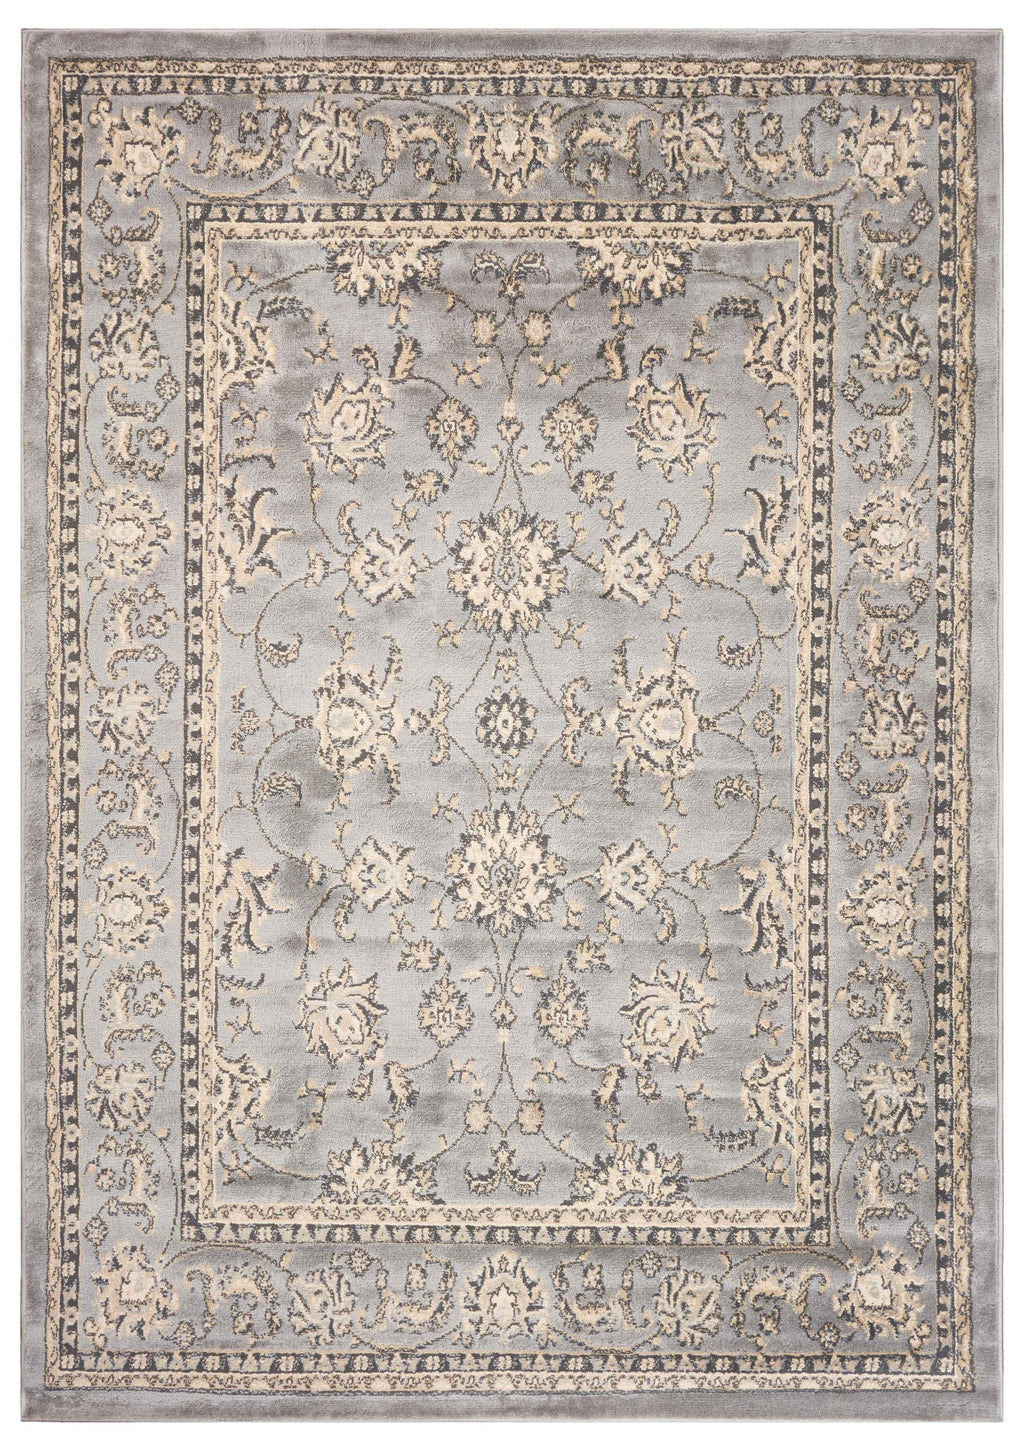 8’ x 9’ Gray Floral Vines Traditional Area Rug